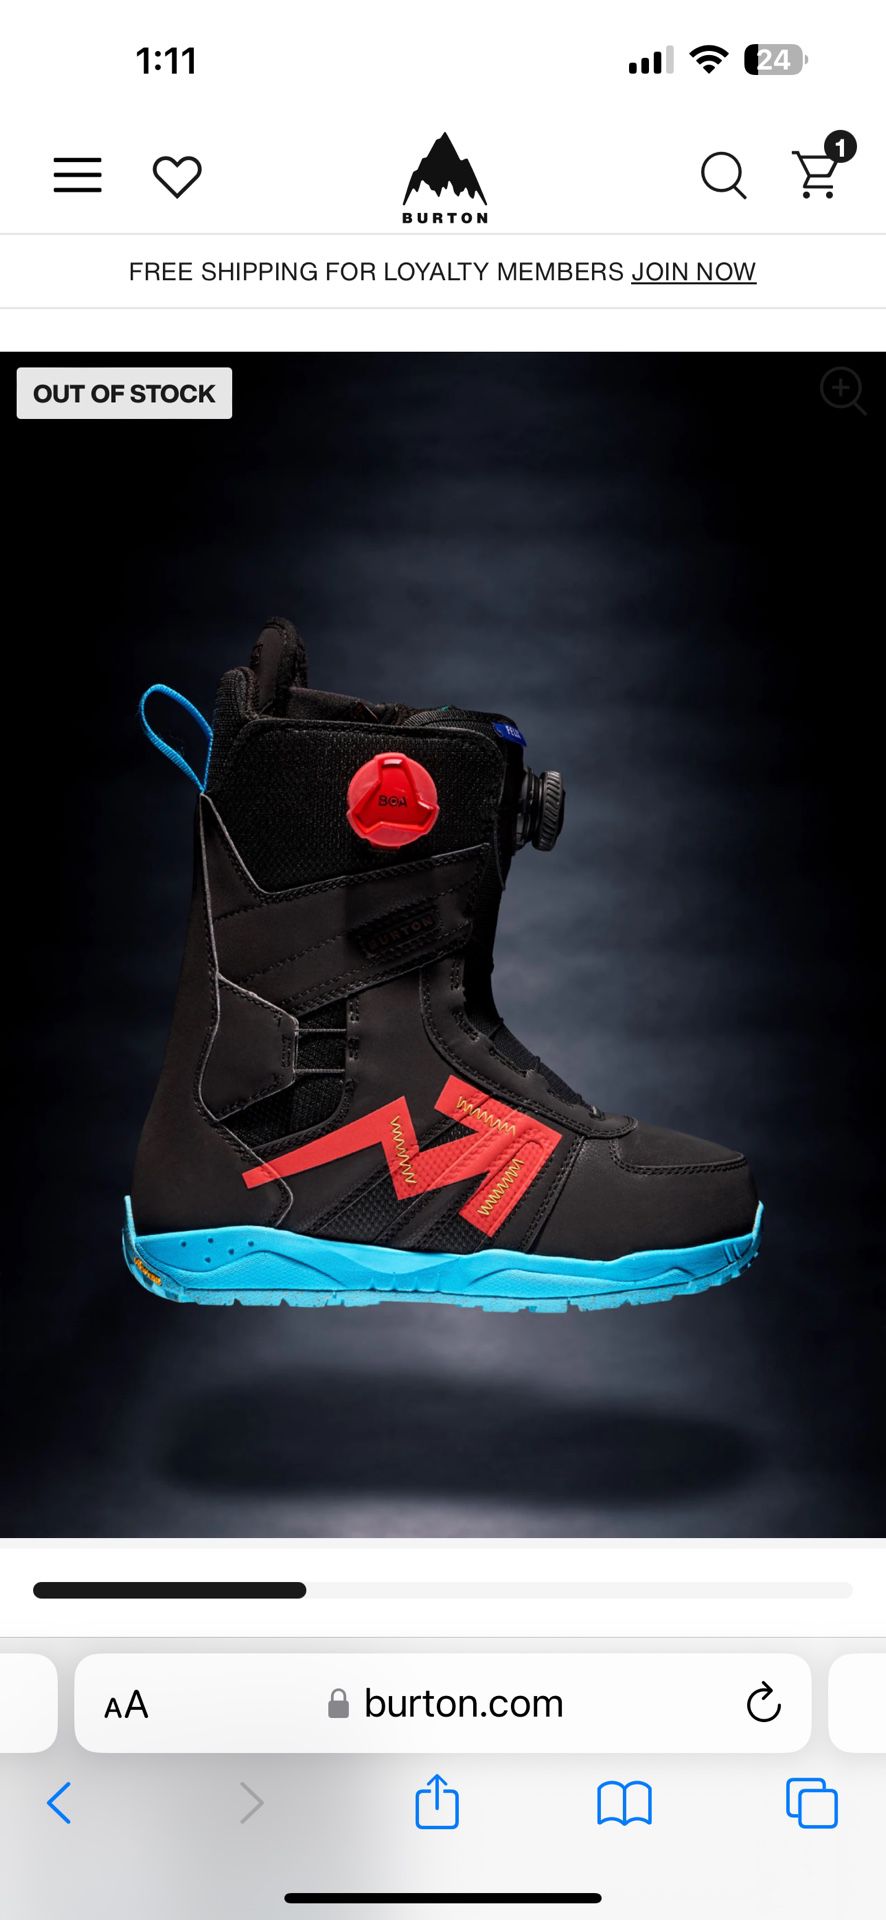 Limited Edition Virgil Abloh Off-White x Burton Collab Size 9 Women’s Snowboarding Boots - NEW WITH TAGS 🏷️ ‼️‼️